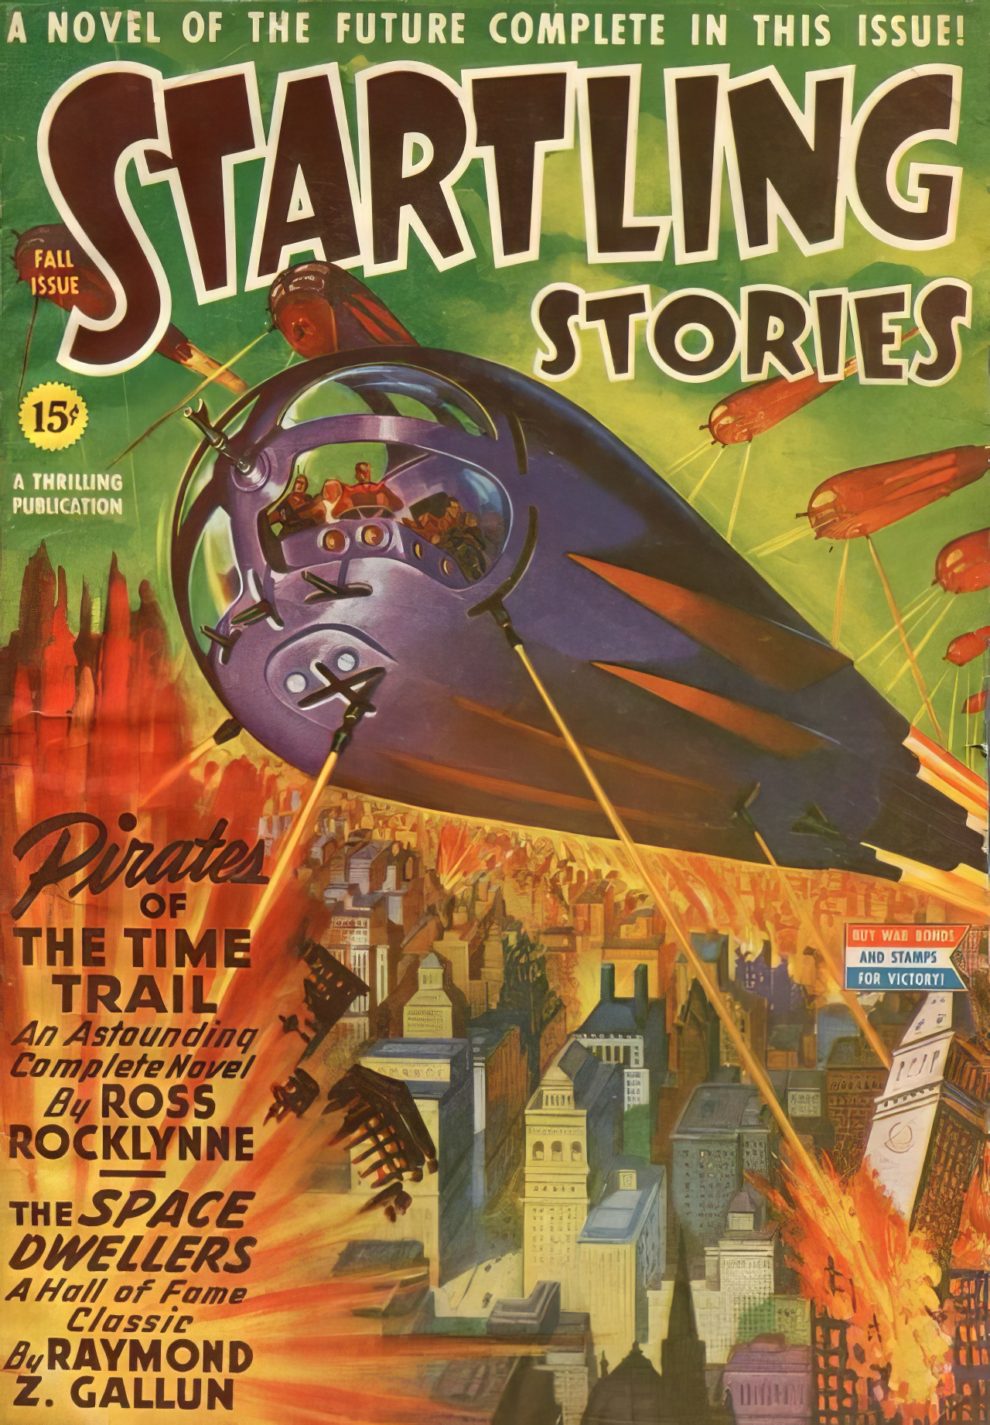 Startling Stories Covers 1940s 19 